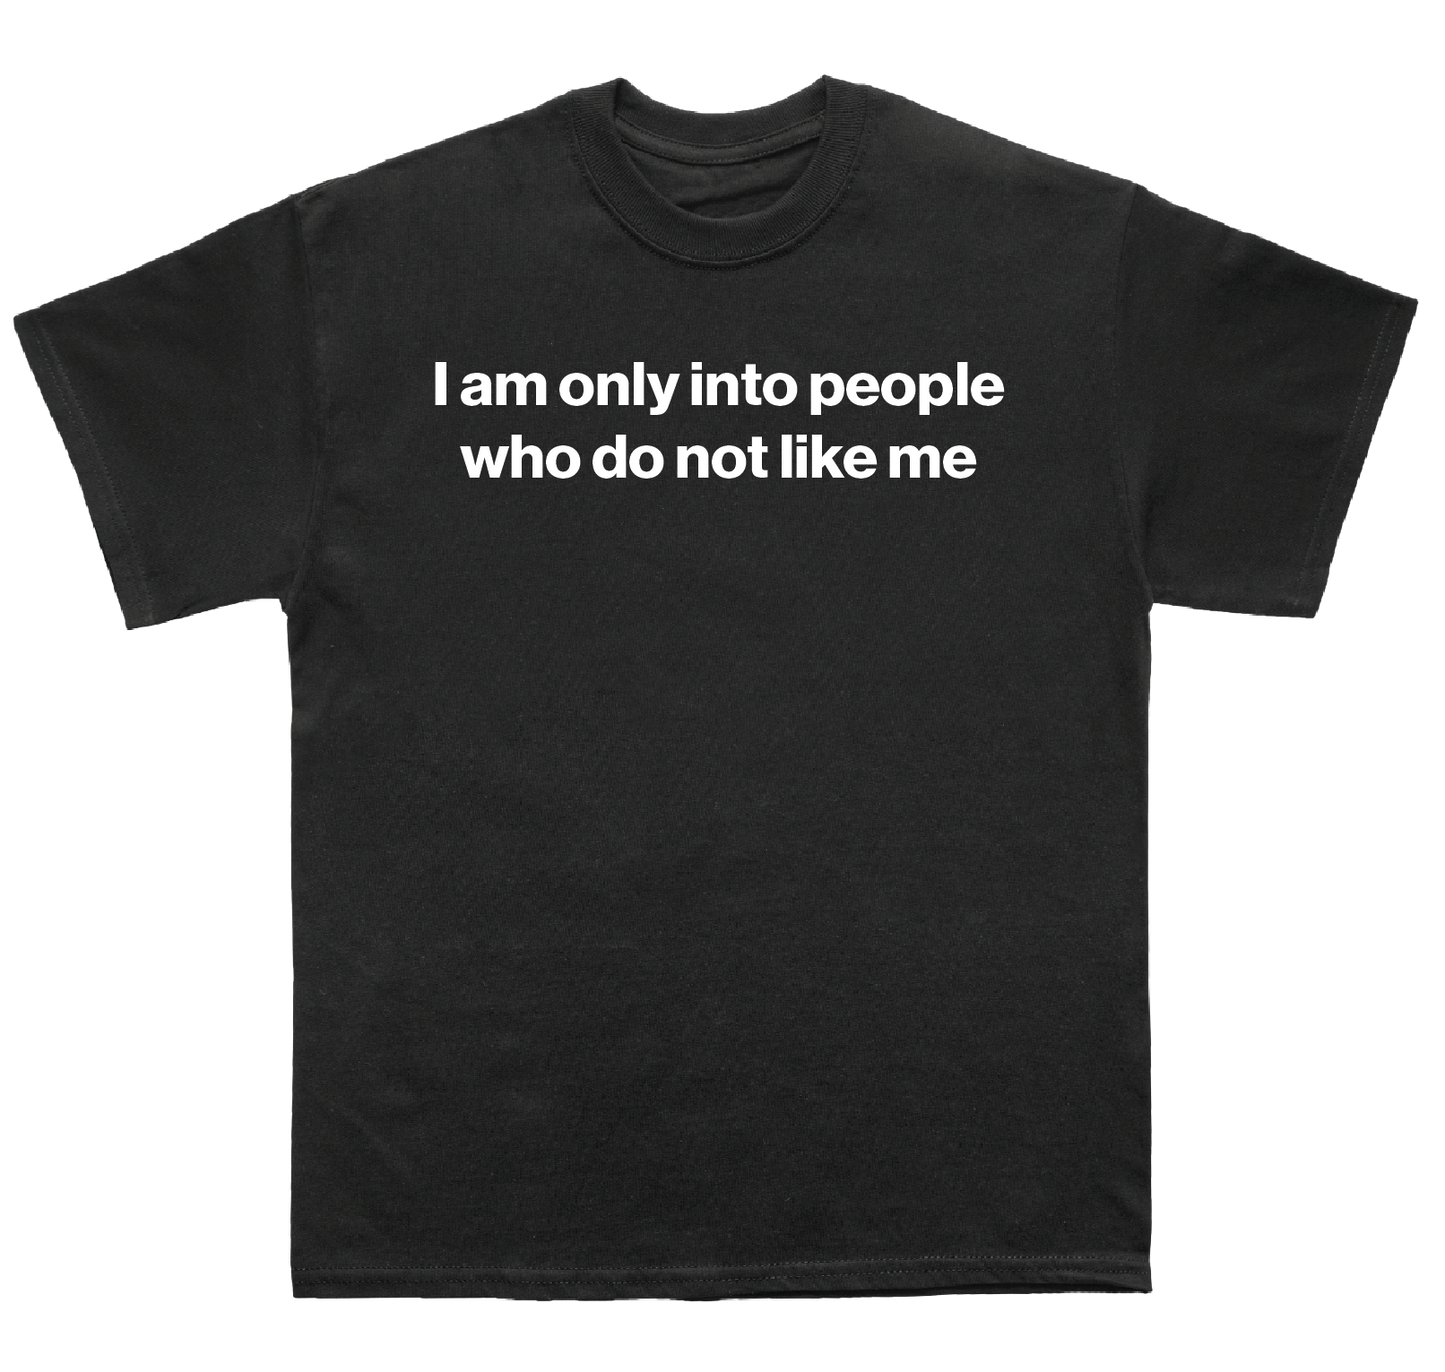 I am only into people who do not like me shirt